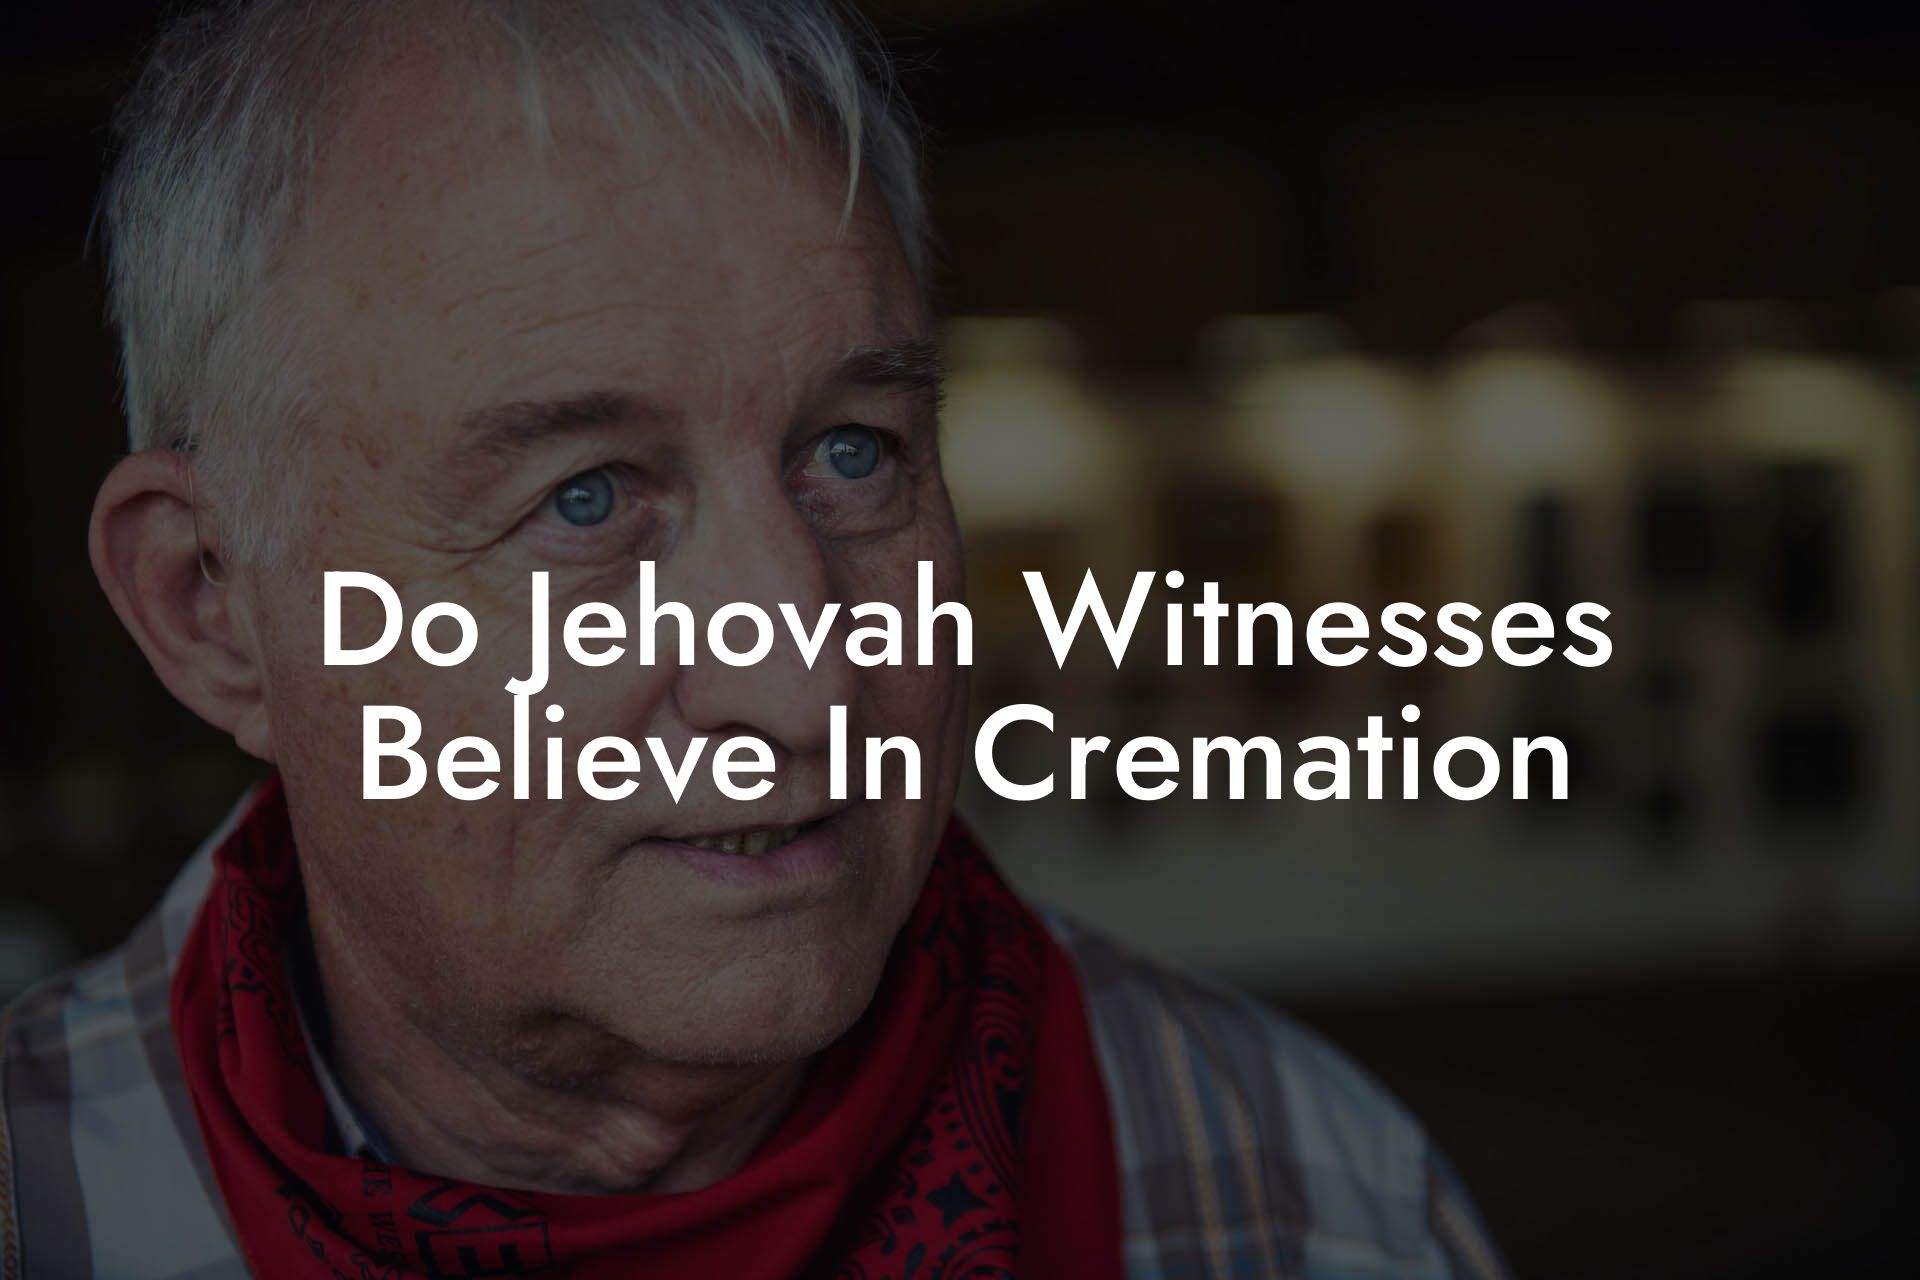 Do Jehovah Witnesses Believe In Cremation